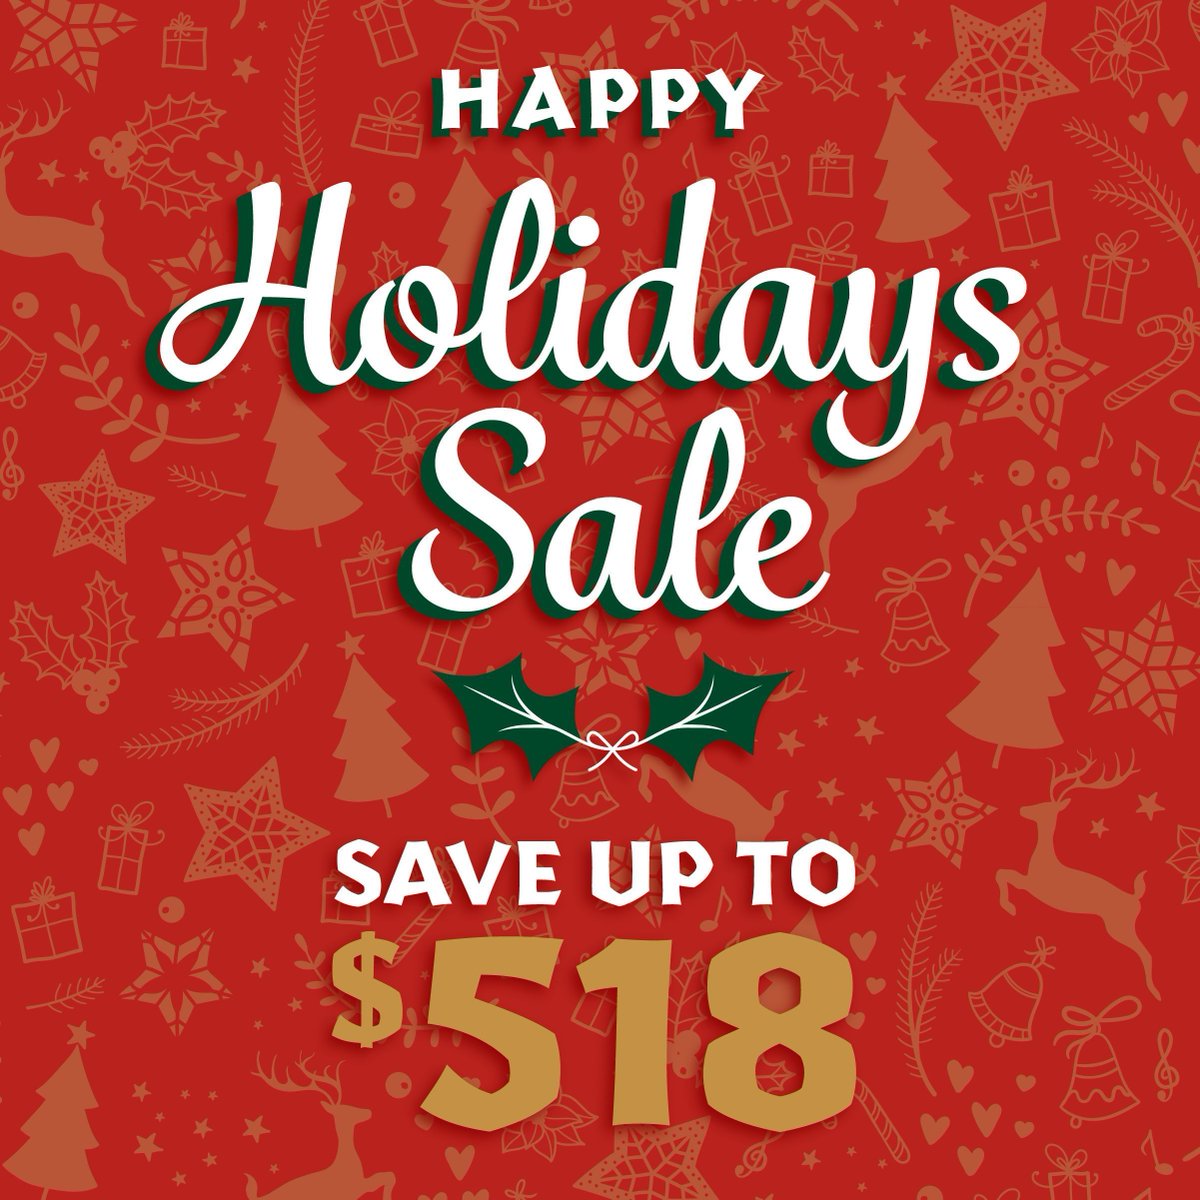 Free stuff AND a discount? Give the gift of movement and save up to $518—that's up to $300 off with coupon plus four free items with the purchase of a standing desk. Work merrier. Shop before the Happy Holidays Sale ends on December 12. buff.ly/32GLvIF